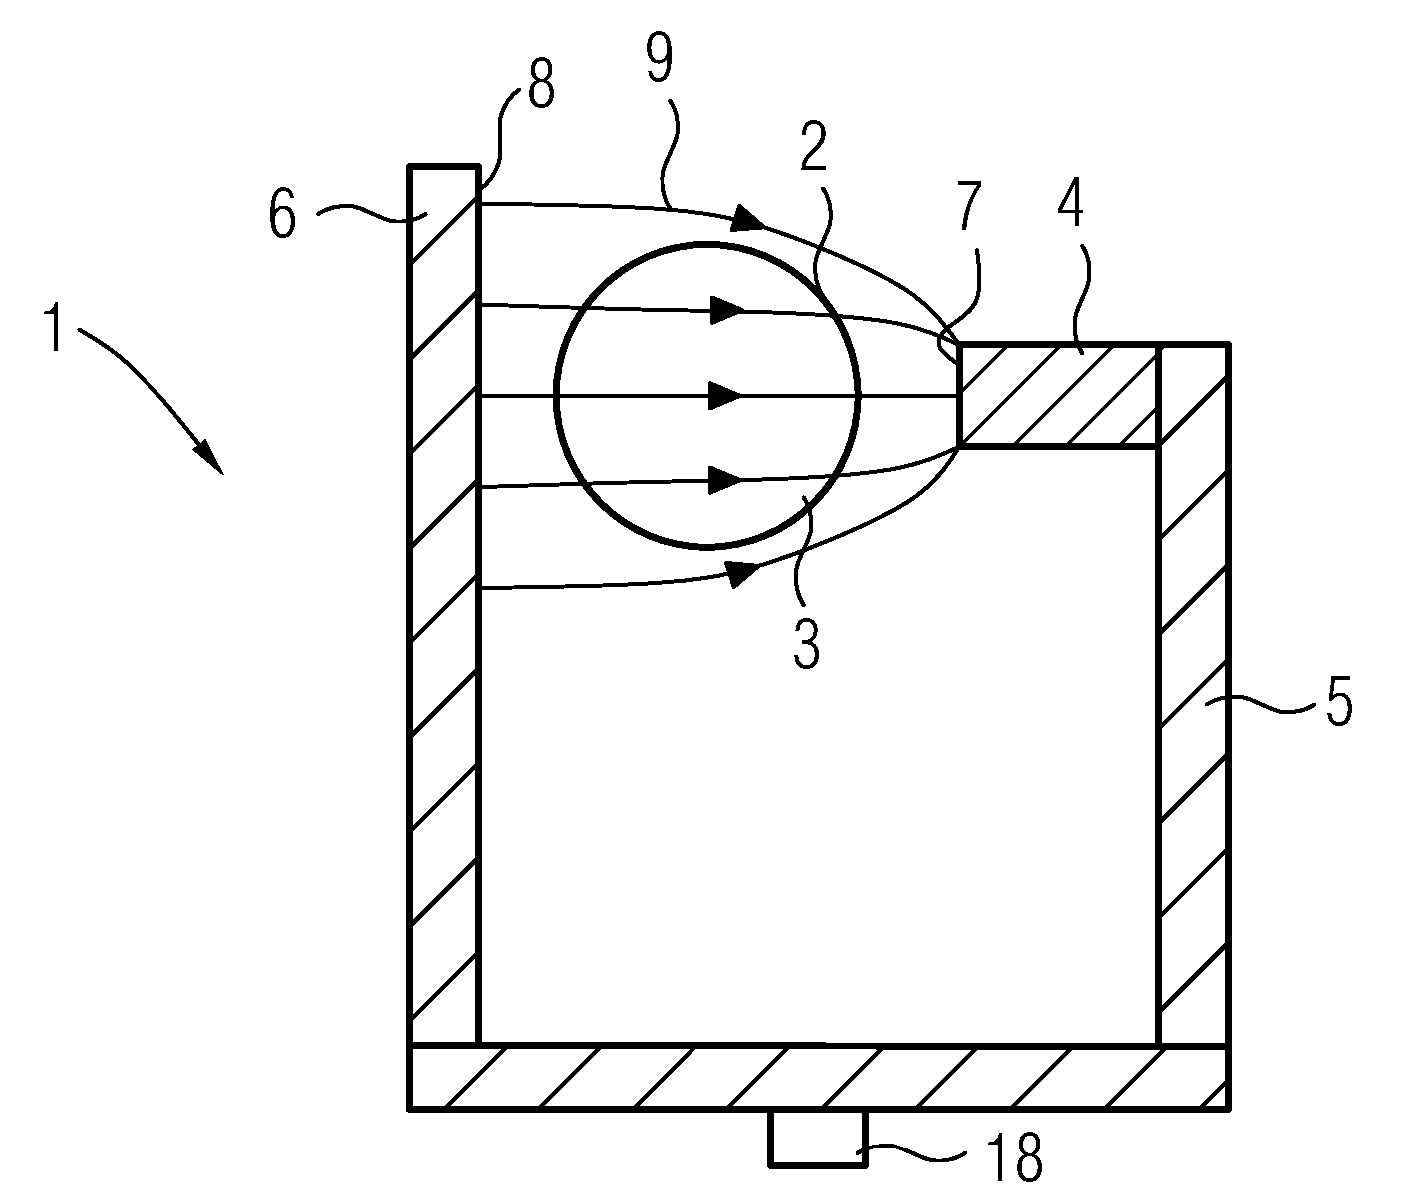 Separating device for separating particles able to be magnetized and particles not able to be magnetized transported in a suspension flowing through a separating channel